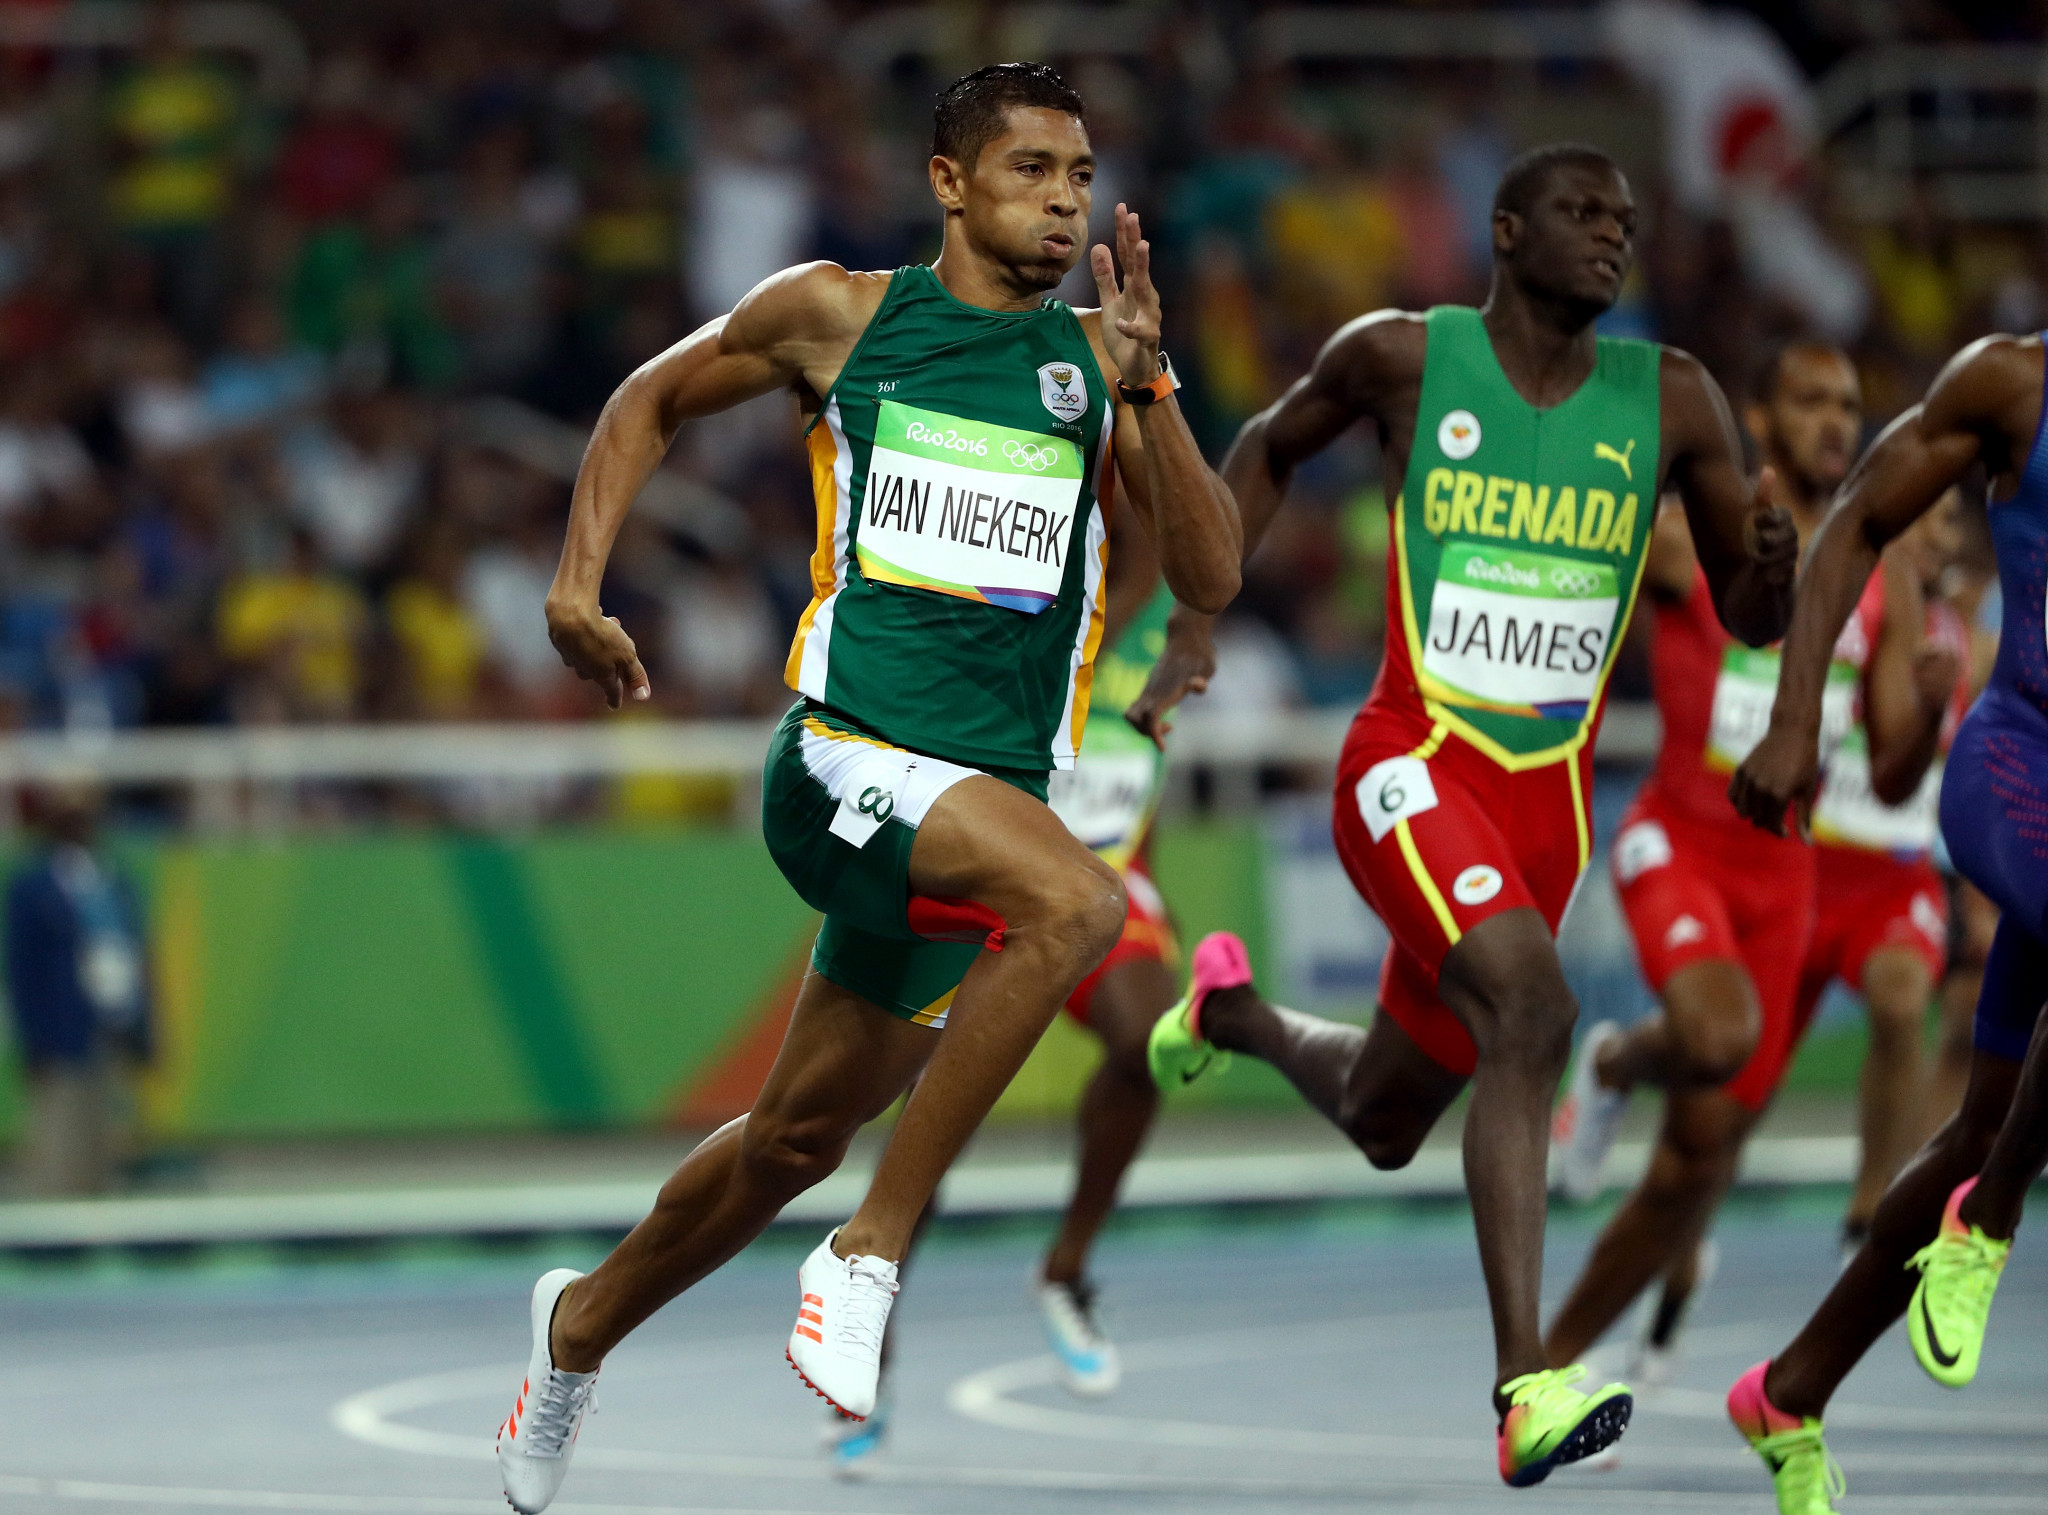 Olympic champion and 400m world record-holder Wayde van Niekerk will be one of the stars of South Africa's delegation heading to Tokyo ©Getty Images